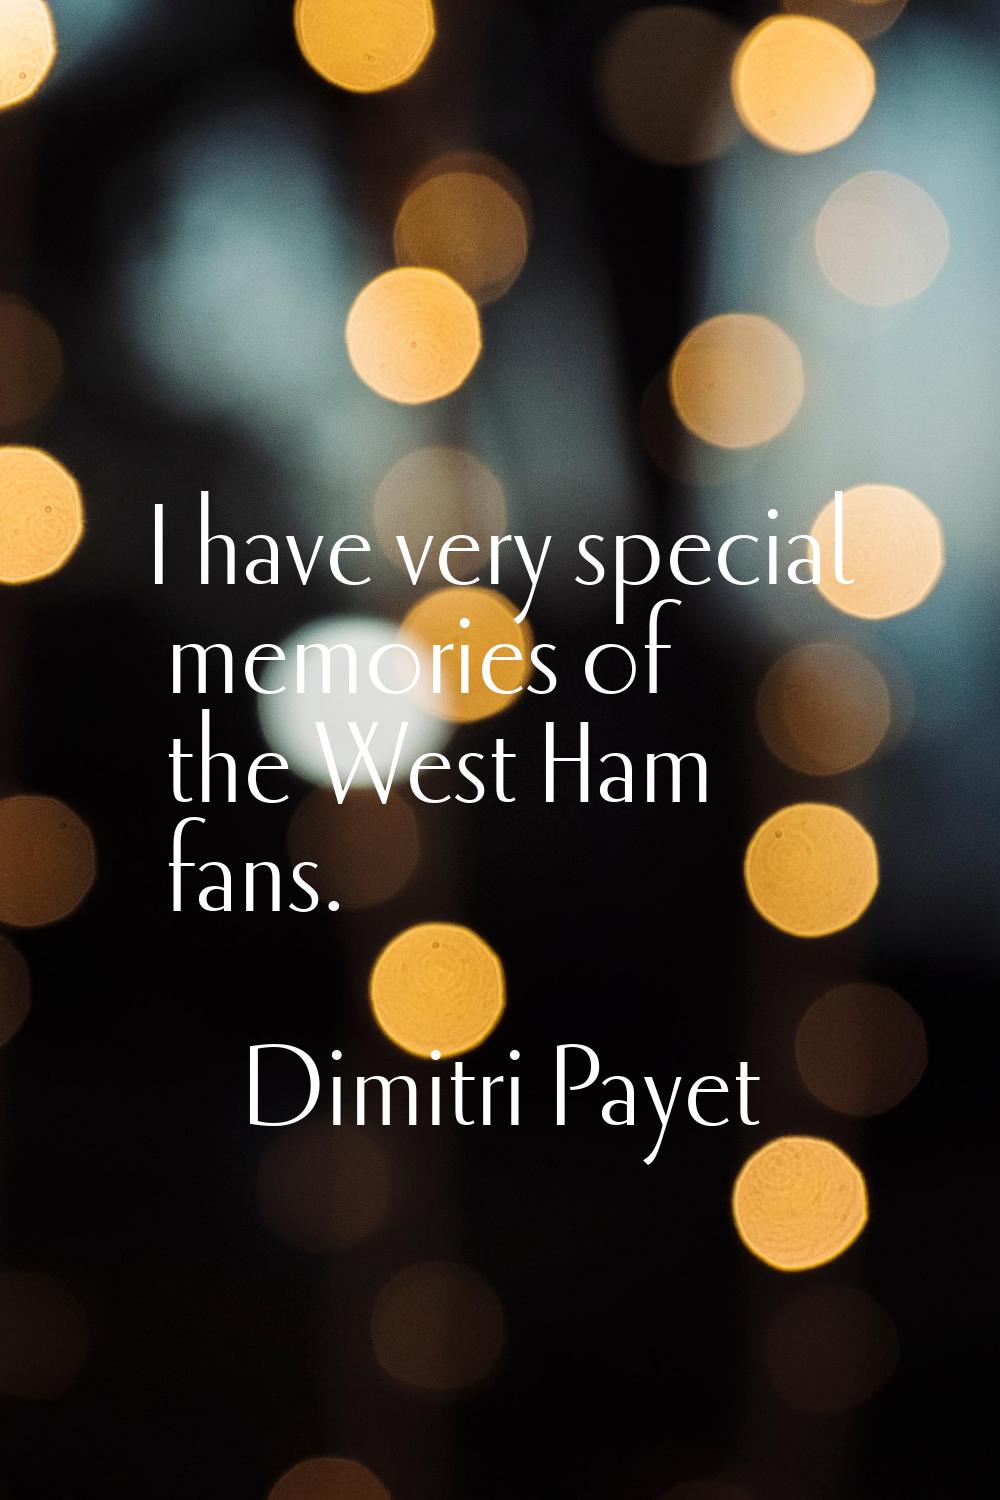 I have very special memories of the West Ham fans.